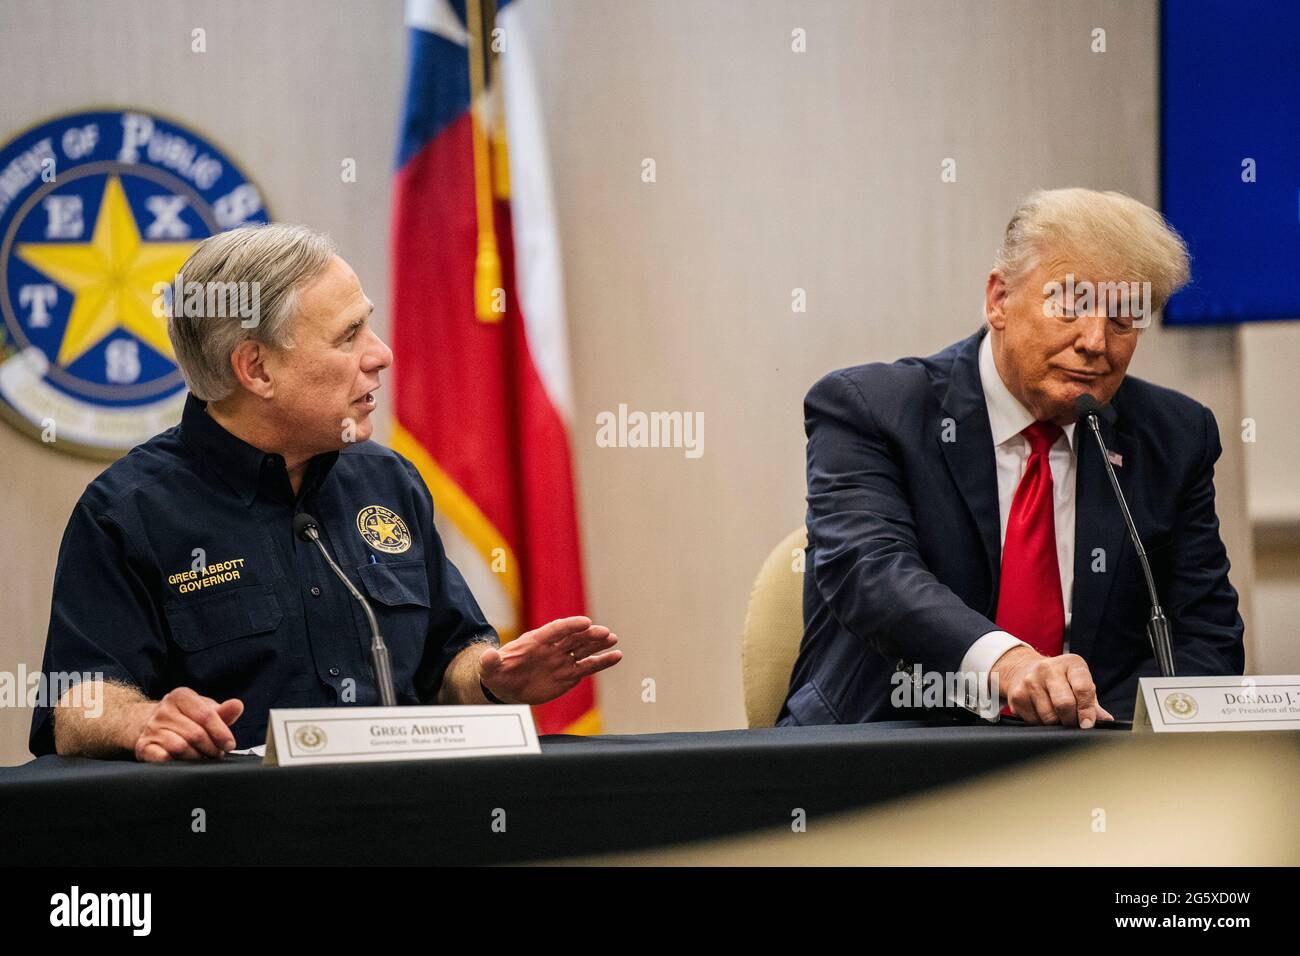 Weslaco Texas USA, June 30 2021: Texas Gov. GREG ABBOTT and former President DONALD TRUMP attend a border security briefing to discuss plans in securing Texas's border with Mexico. Gov. Abbott has pledged to build a state-funded border wall between Texas and Mexico as a surge of mostly Central American immigrants crossing into the United States has challenged U.S. immigration agencies. So far in 2021, U.S. Border Patrol agents have apprehended more than 900,000 immigrants crossing into the United States on the southern border. (Pool Photo/ Brandon Bell) Credit: Bob Daemmrich/Alamy Live News Stock Photo